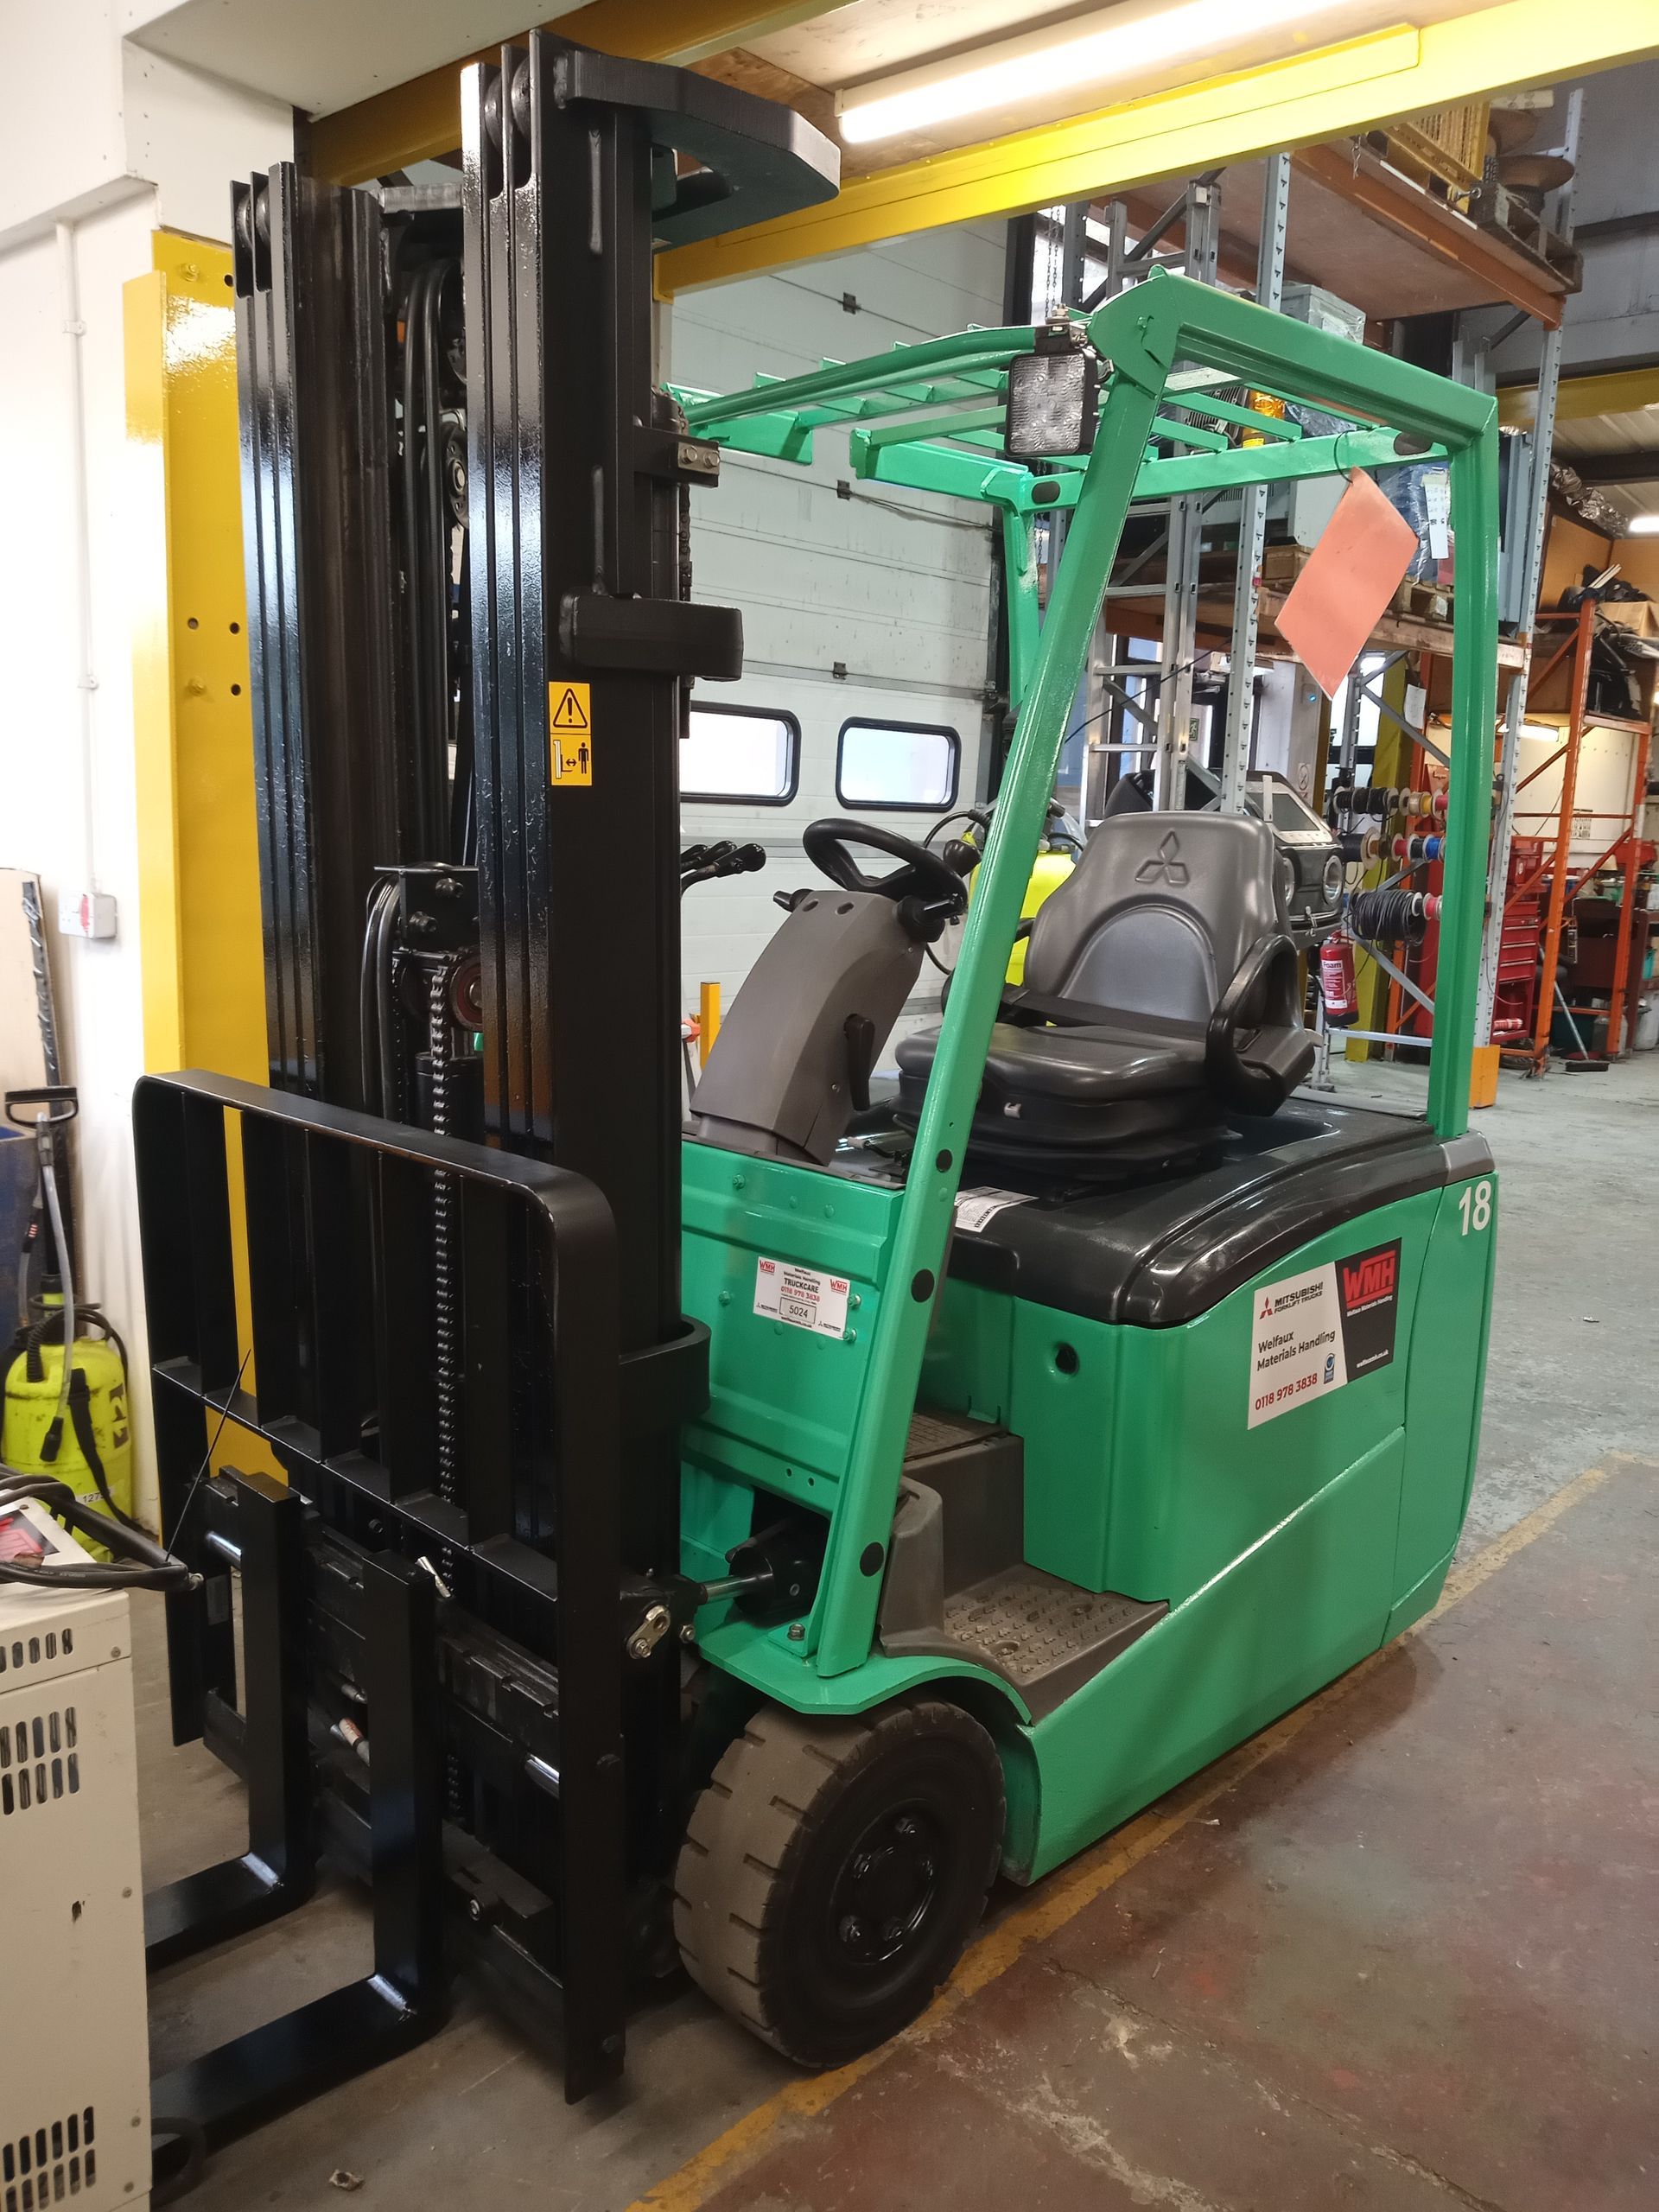 A green forklift is parked in a warehouse